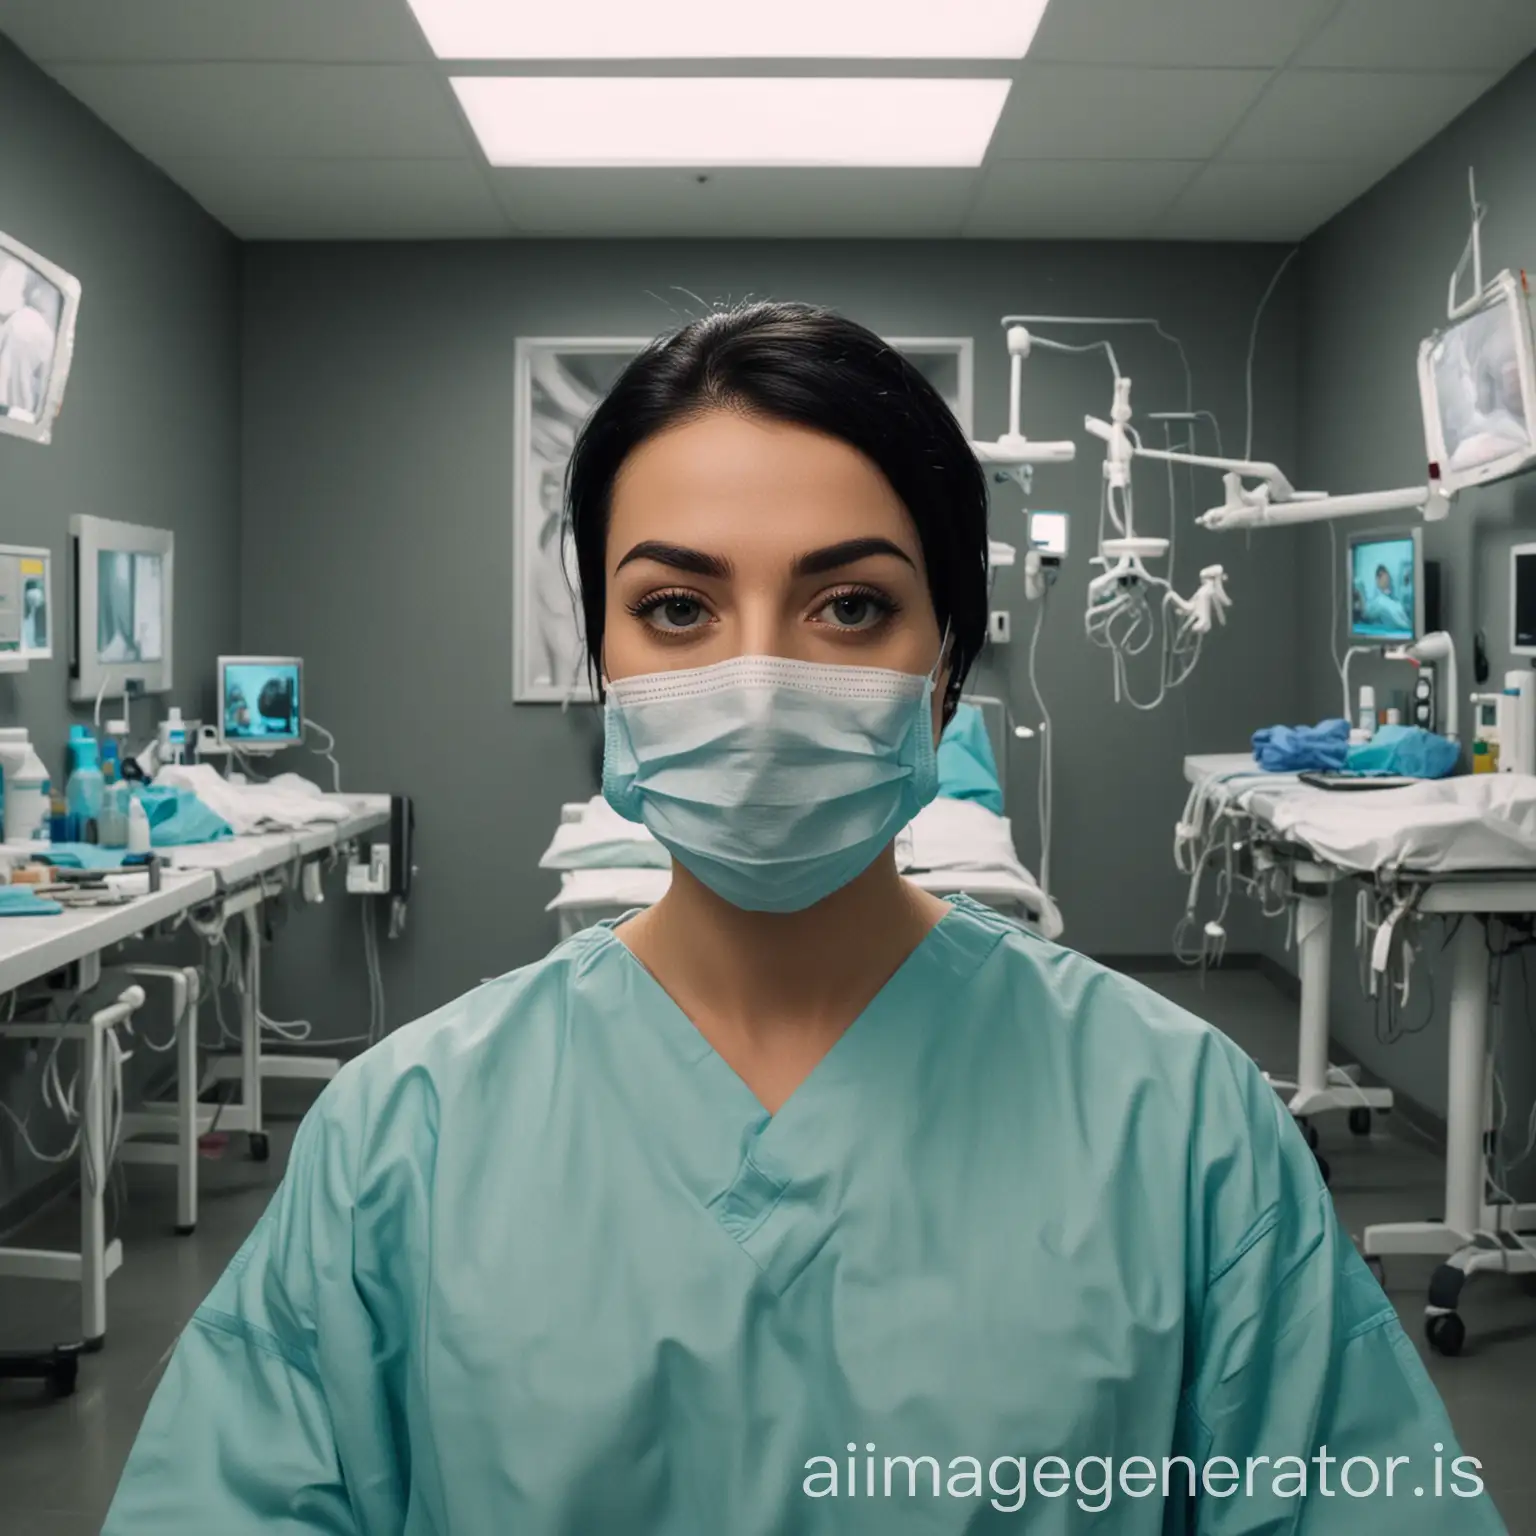 make a YouTube thumbnail without text in the picture show black hair market transplant  in turkey and around the world. make it really realistic make it surgery room fake surgeon 

